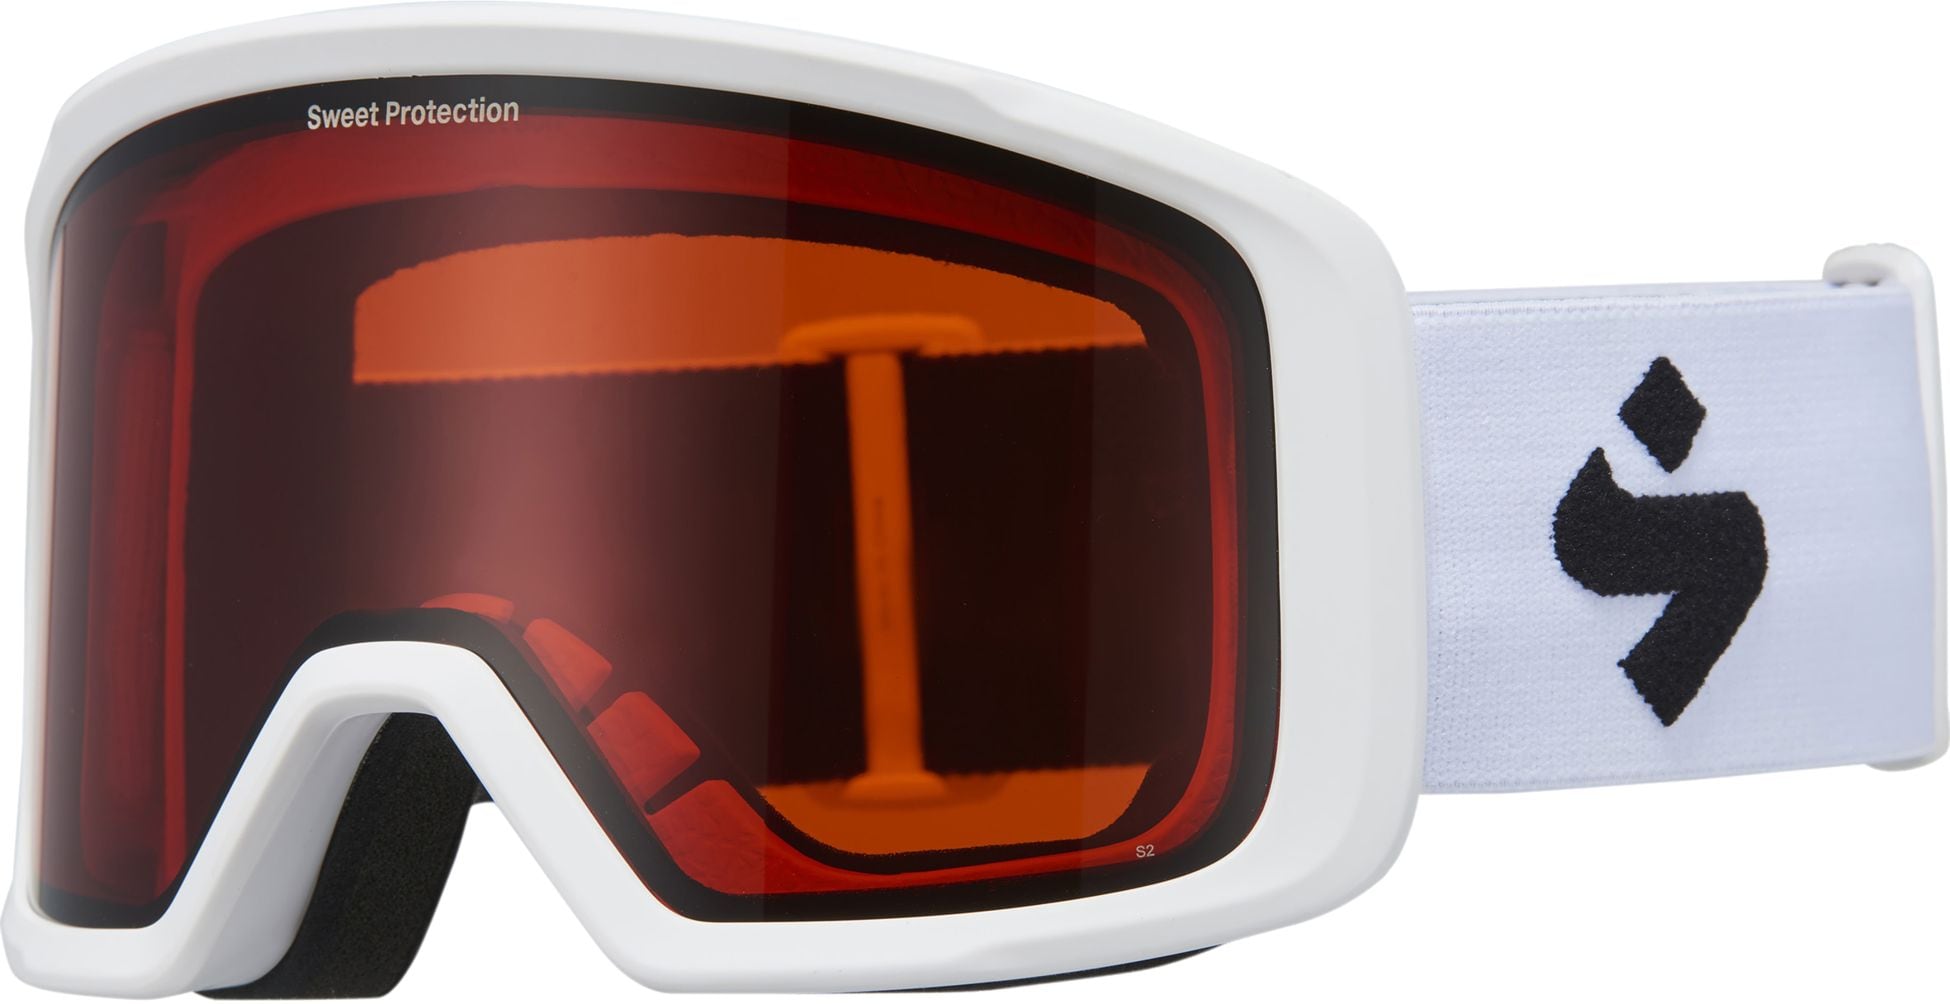 SWEET PROTECTION, FIREWALL GOGGLE